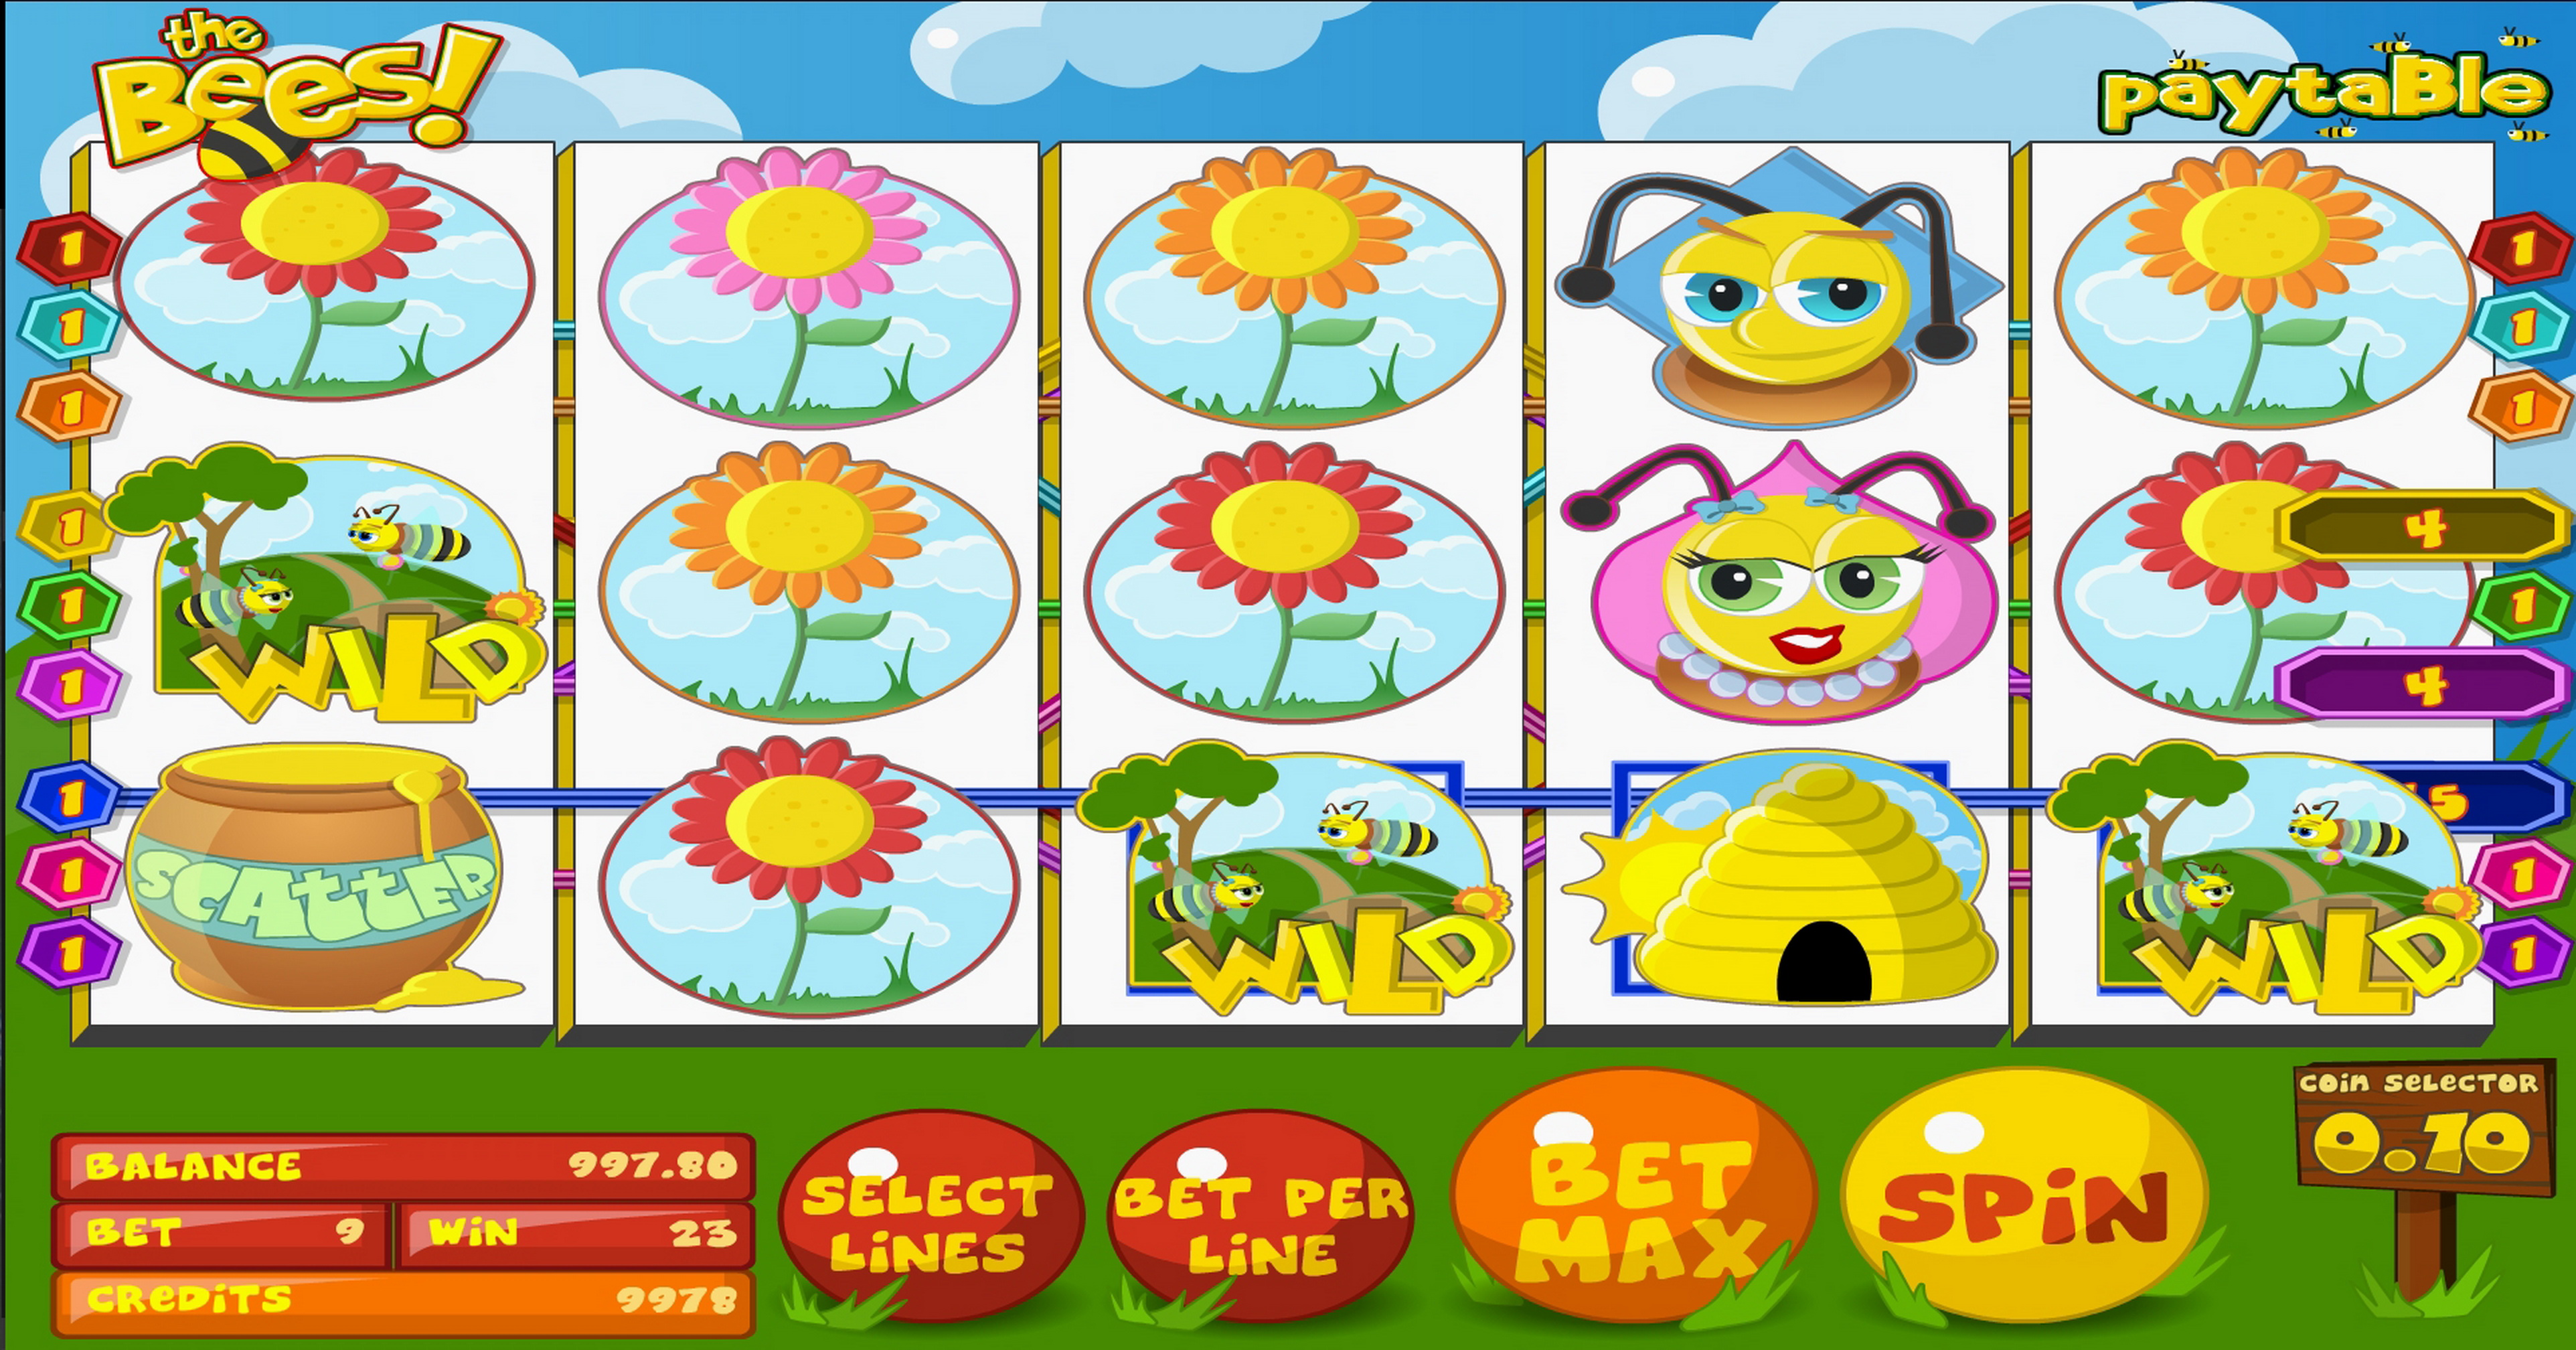 Win Money in The Bees Free Slot Game by Betsoft